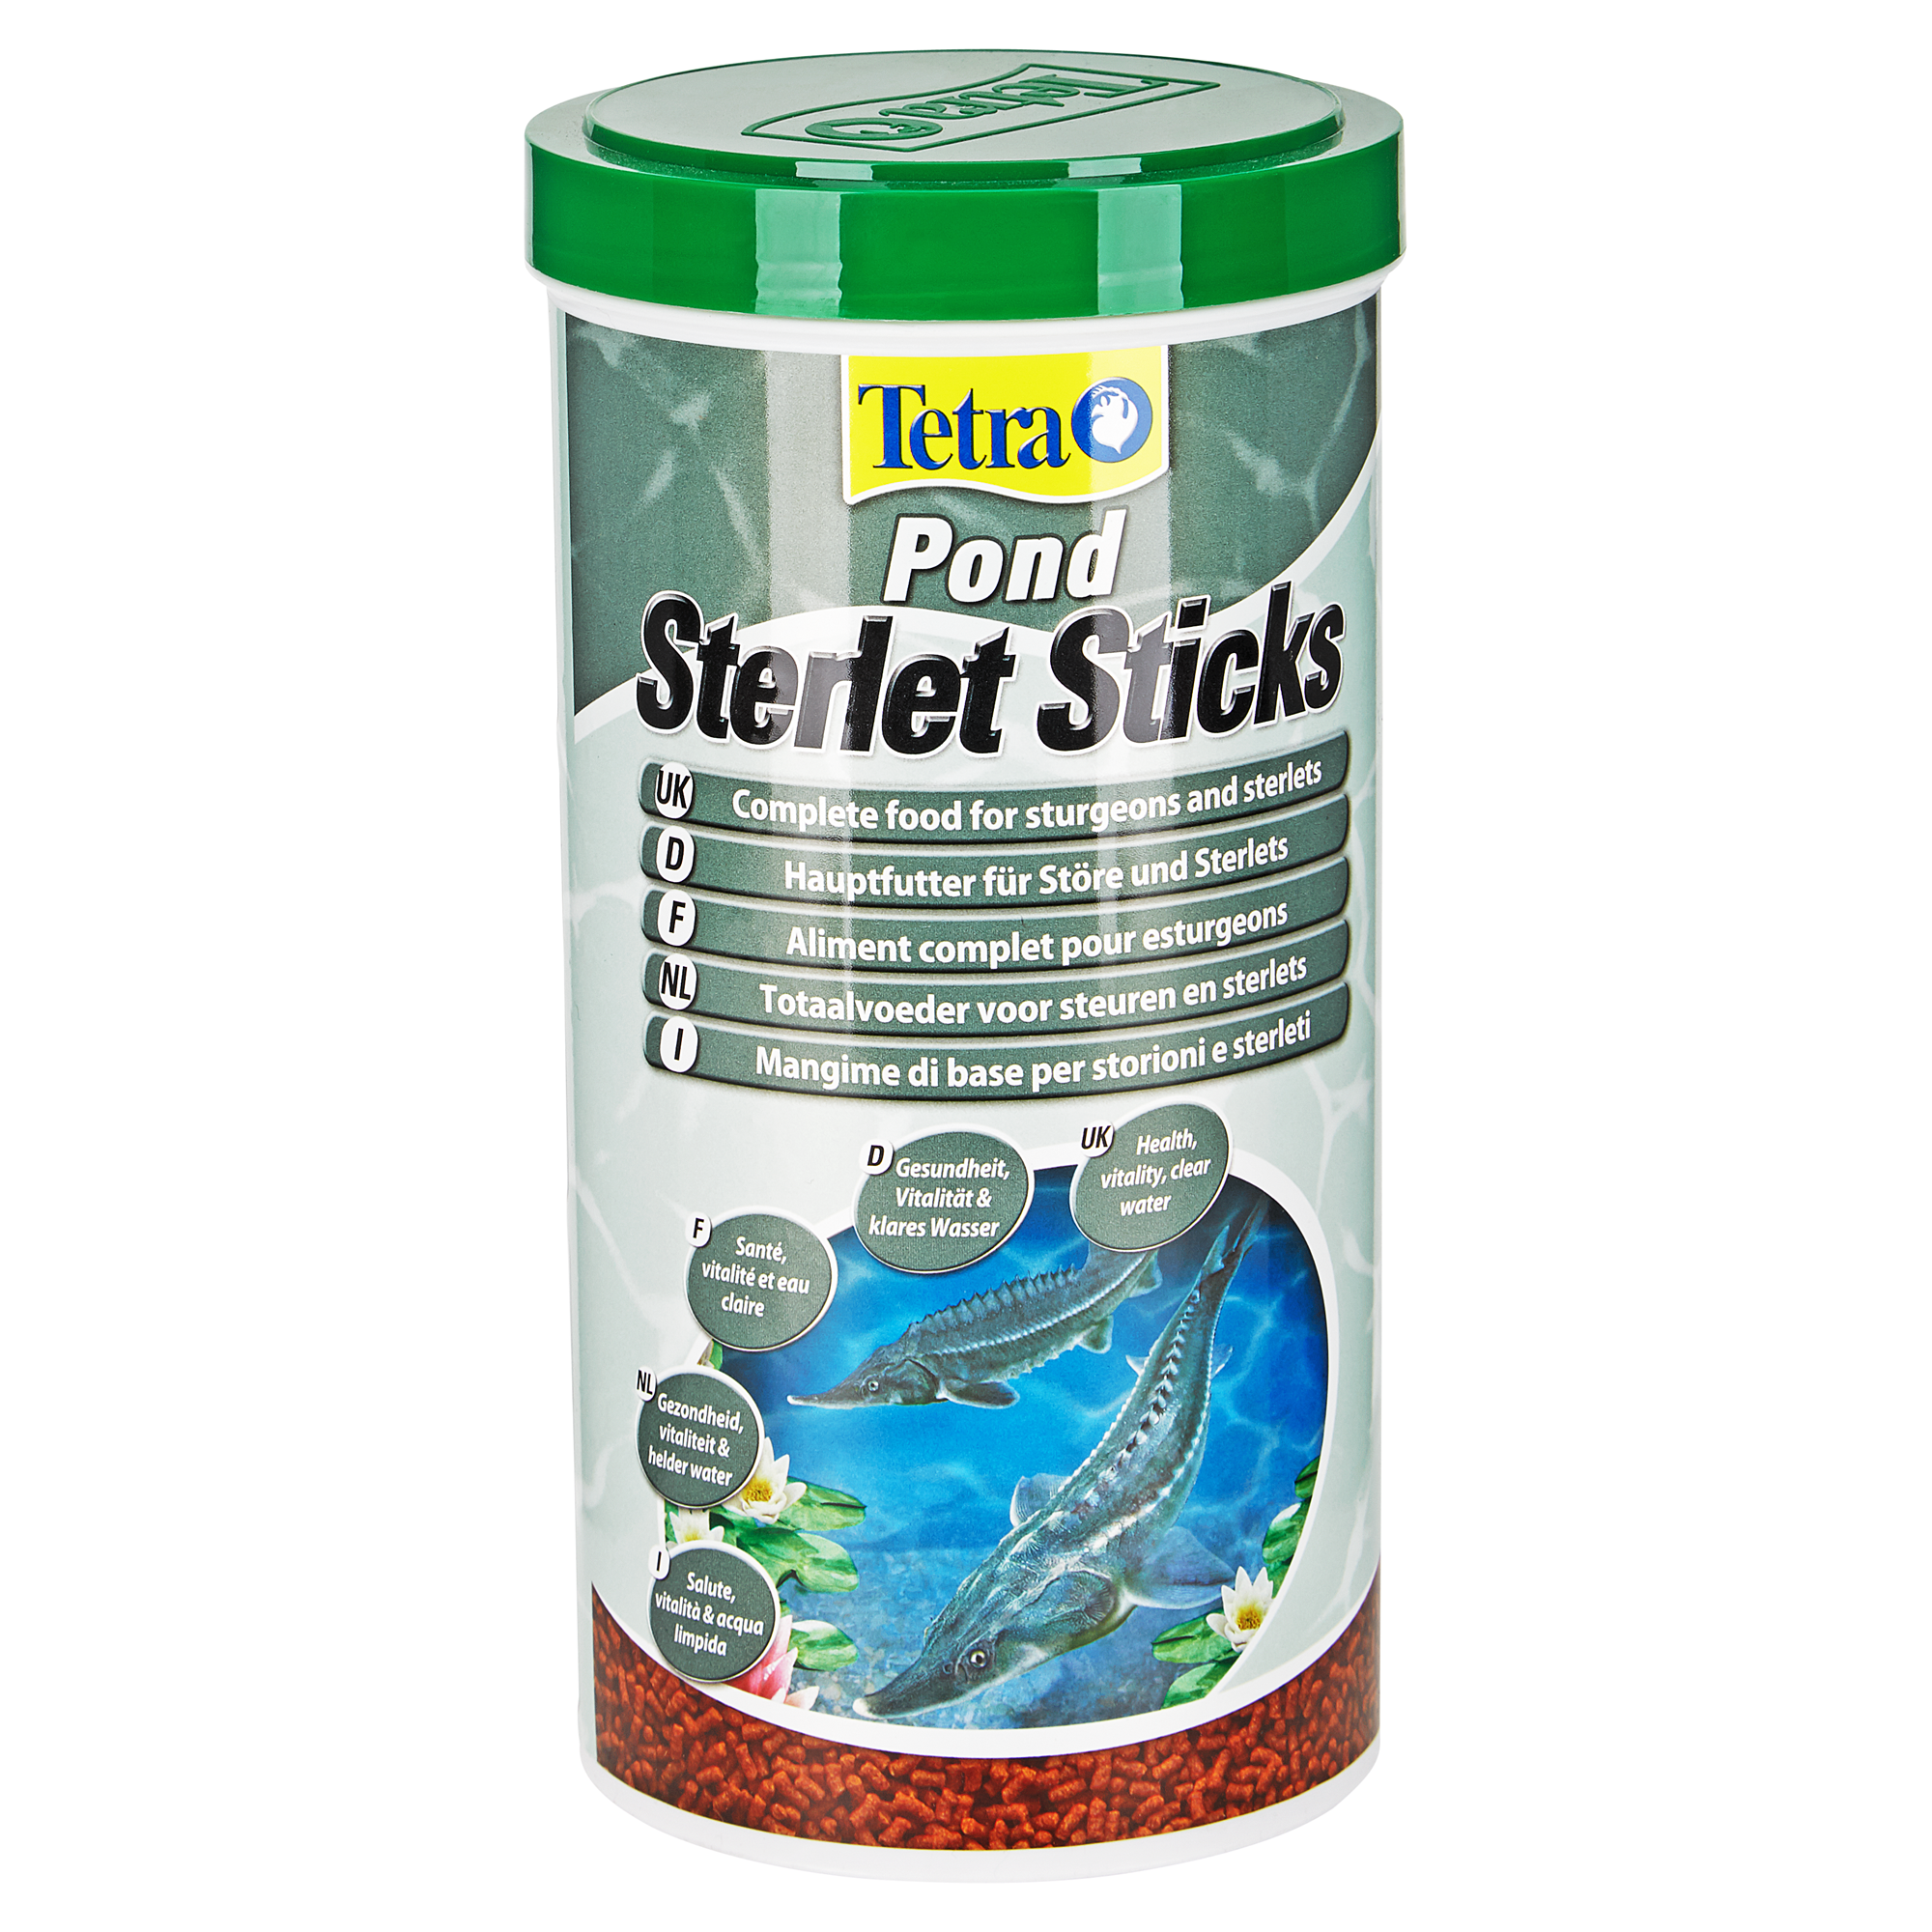 Fischfutter "Pond" Sterlet Sticks 580 g + product picture